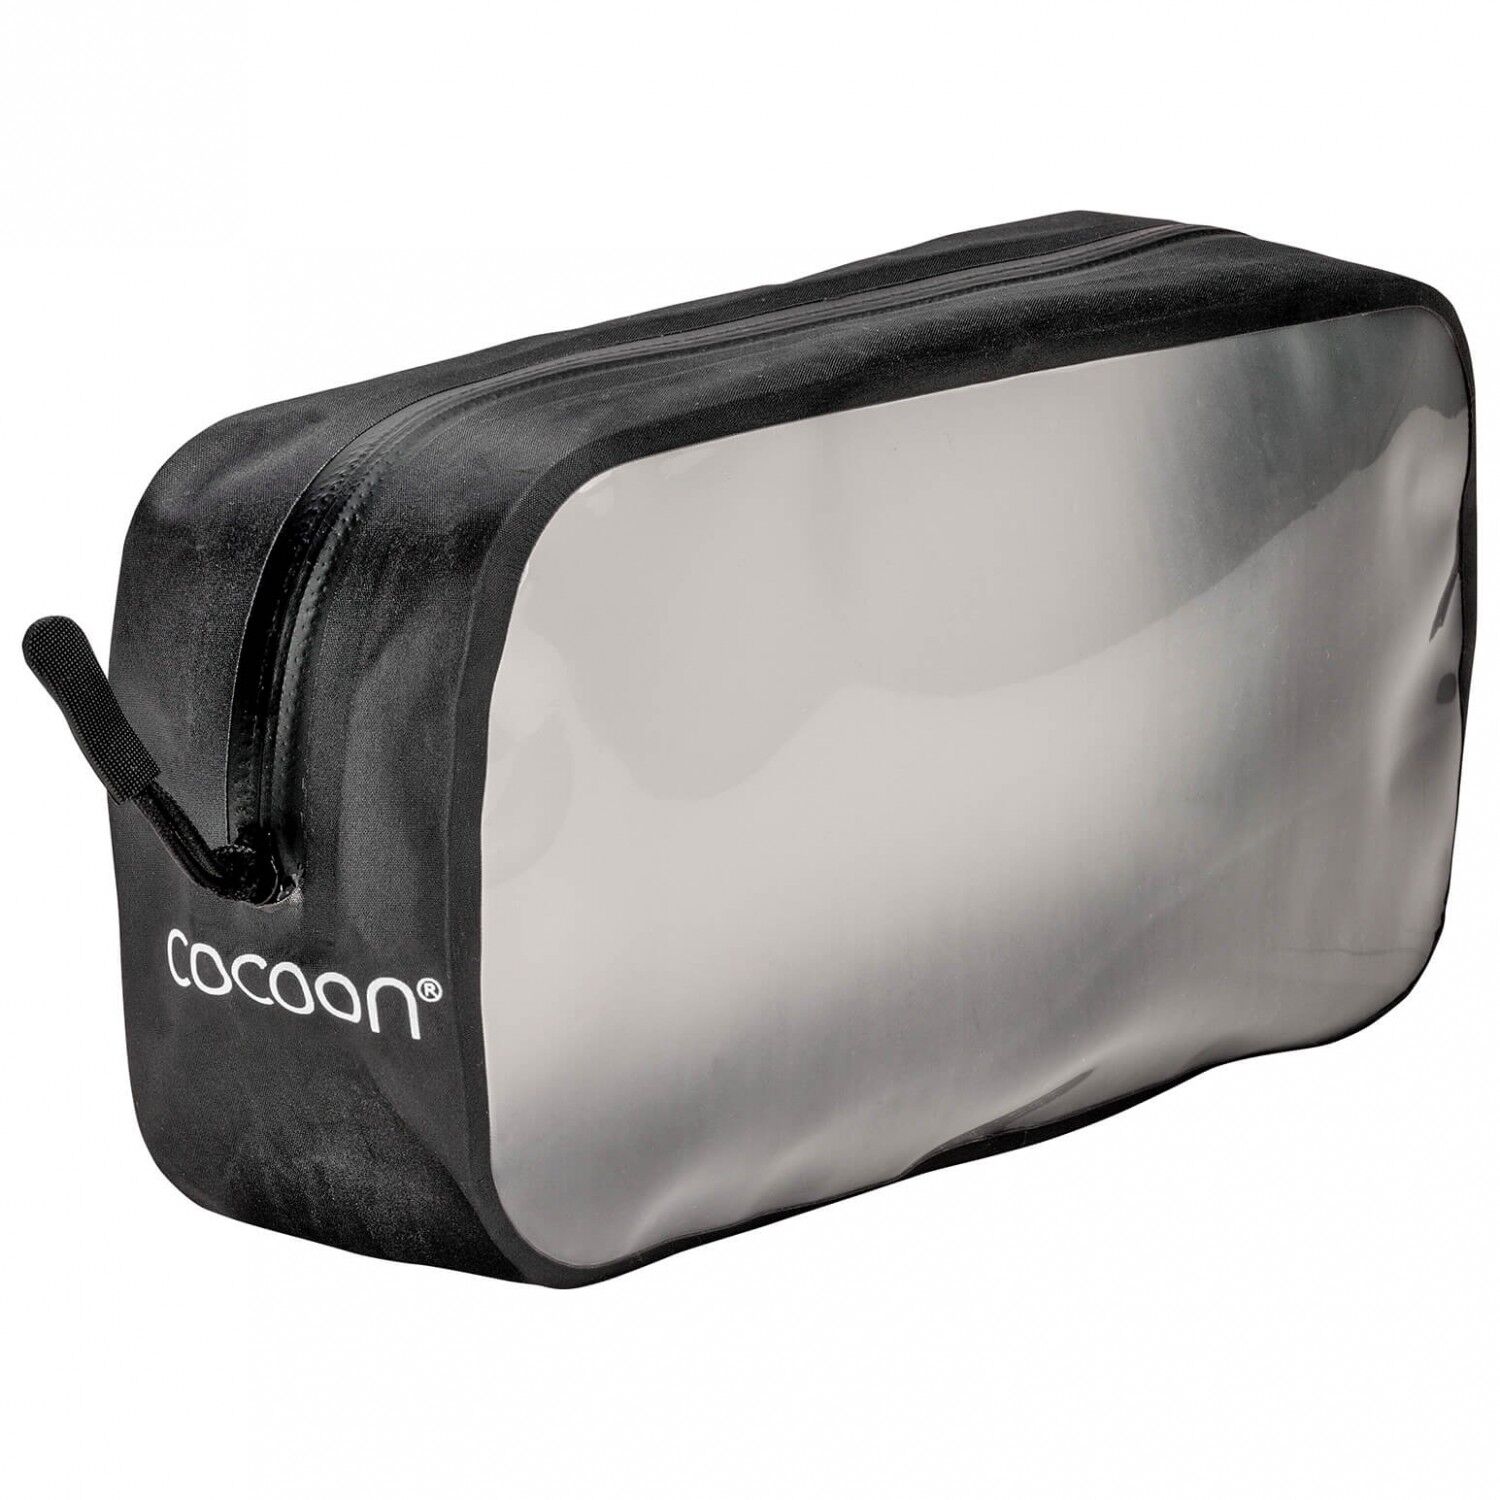 Cocoon Carry On Liquids Bags - Resepåse